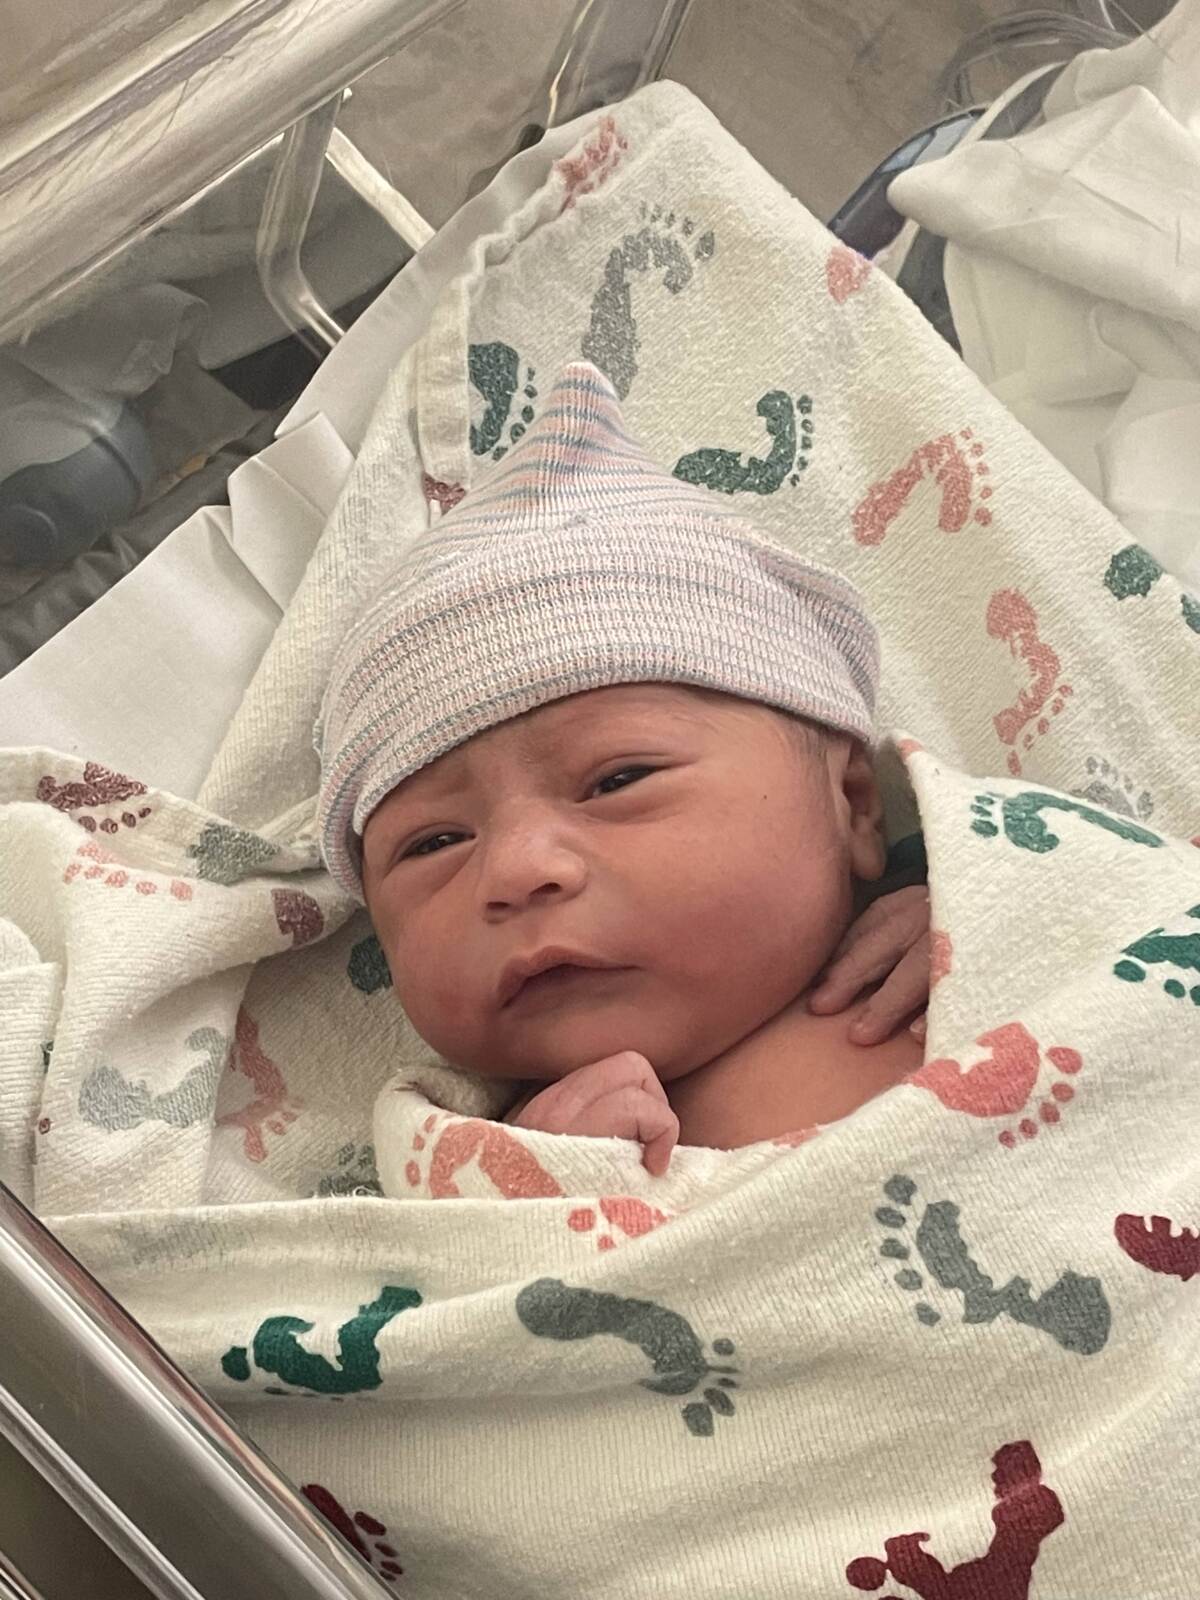 Luka Rosales was born at 12:10 a.m. on New Year's Day.